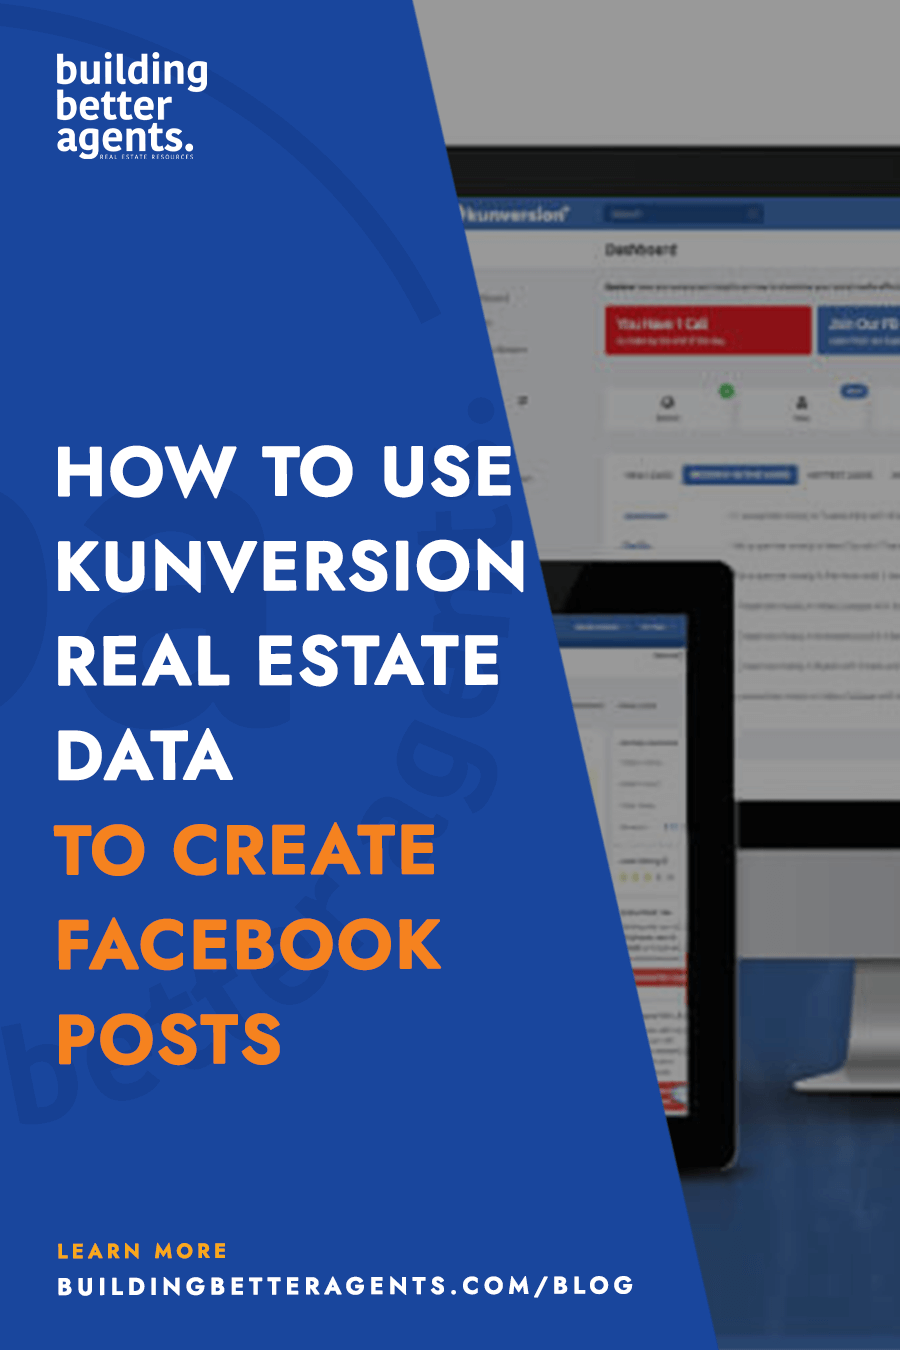 How to use Kunversion real estate data to create Facebook posts